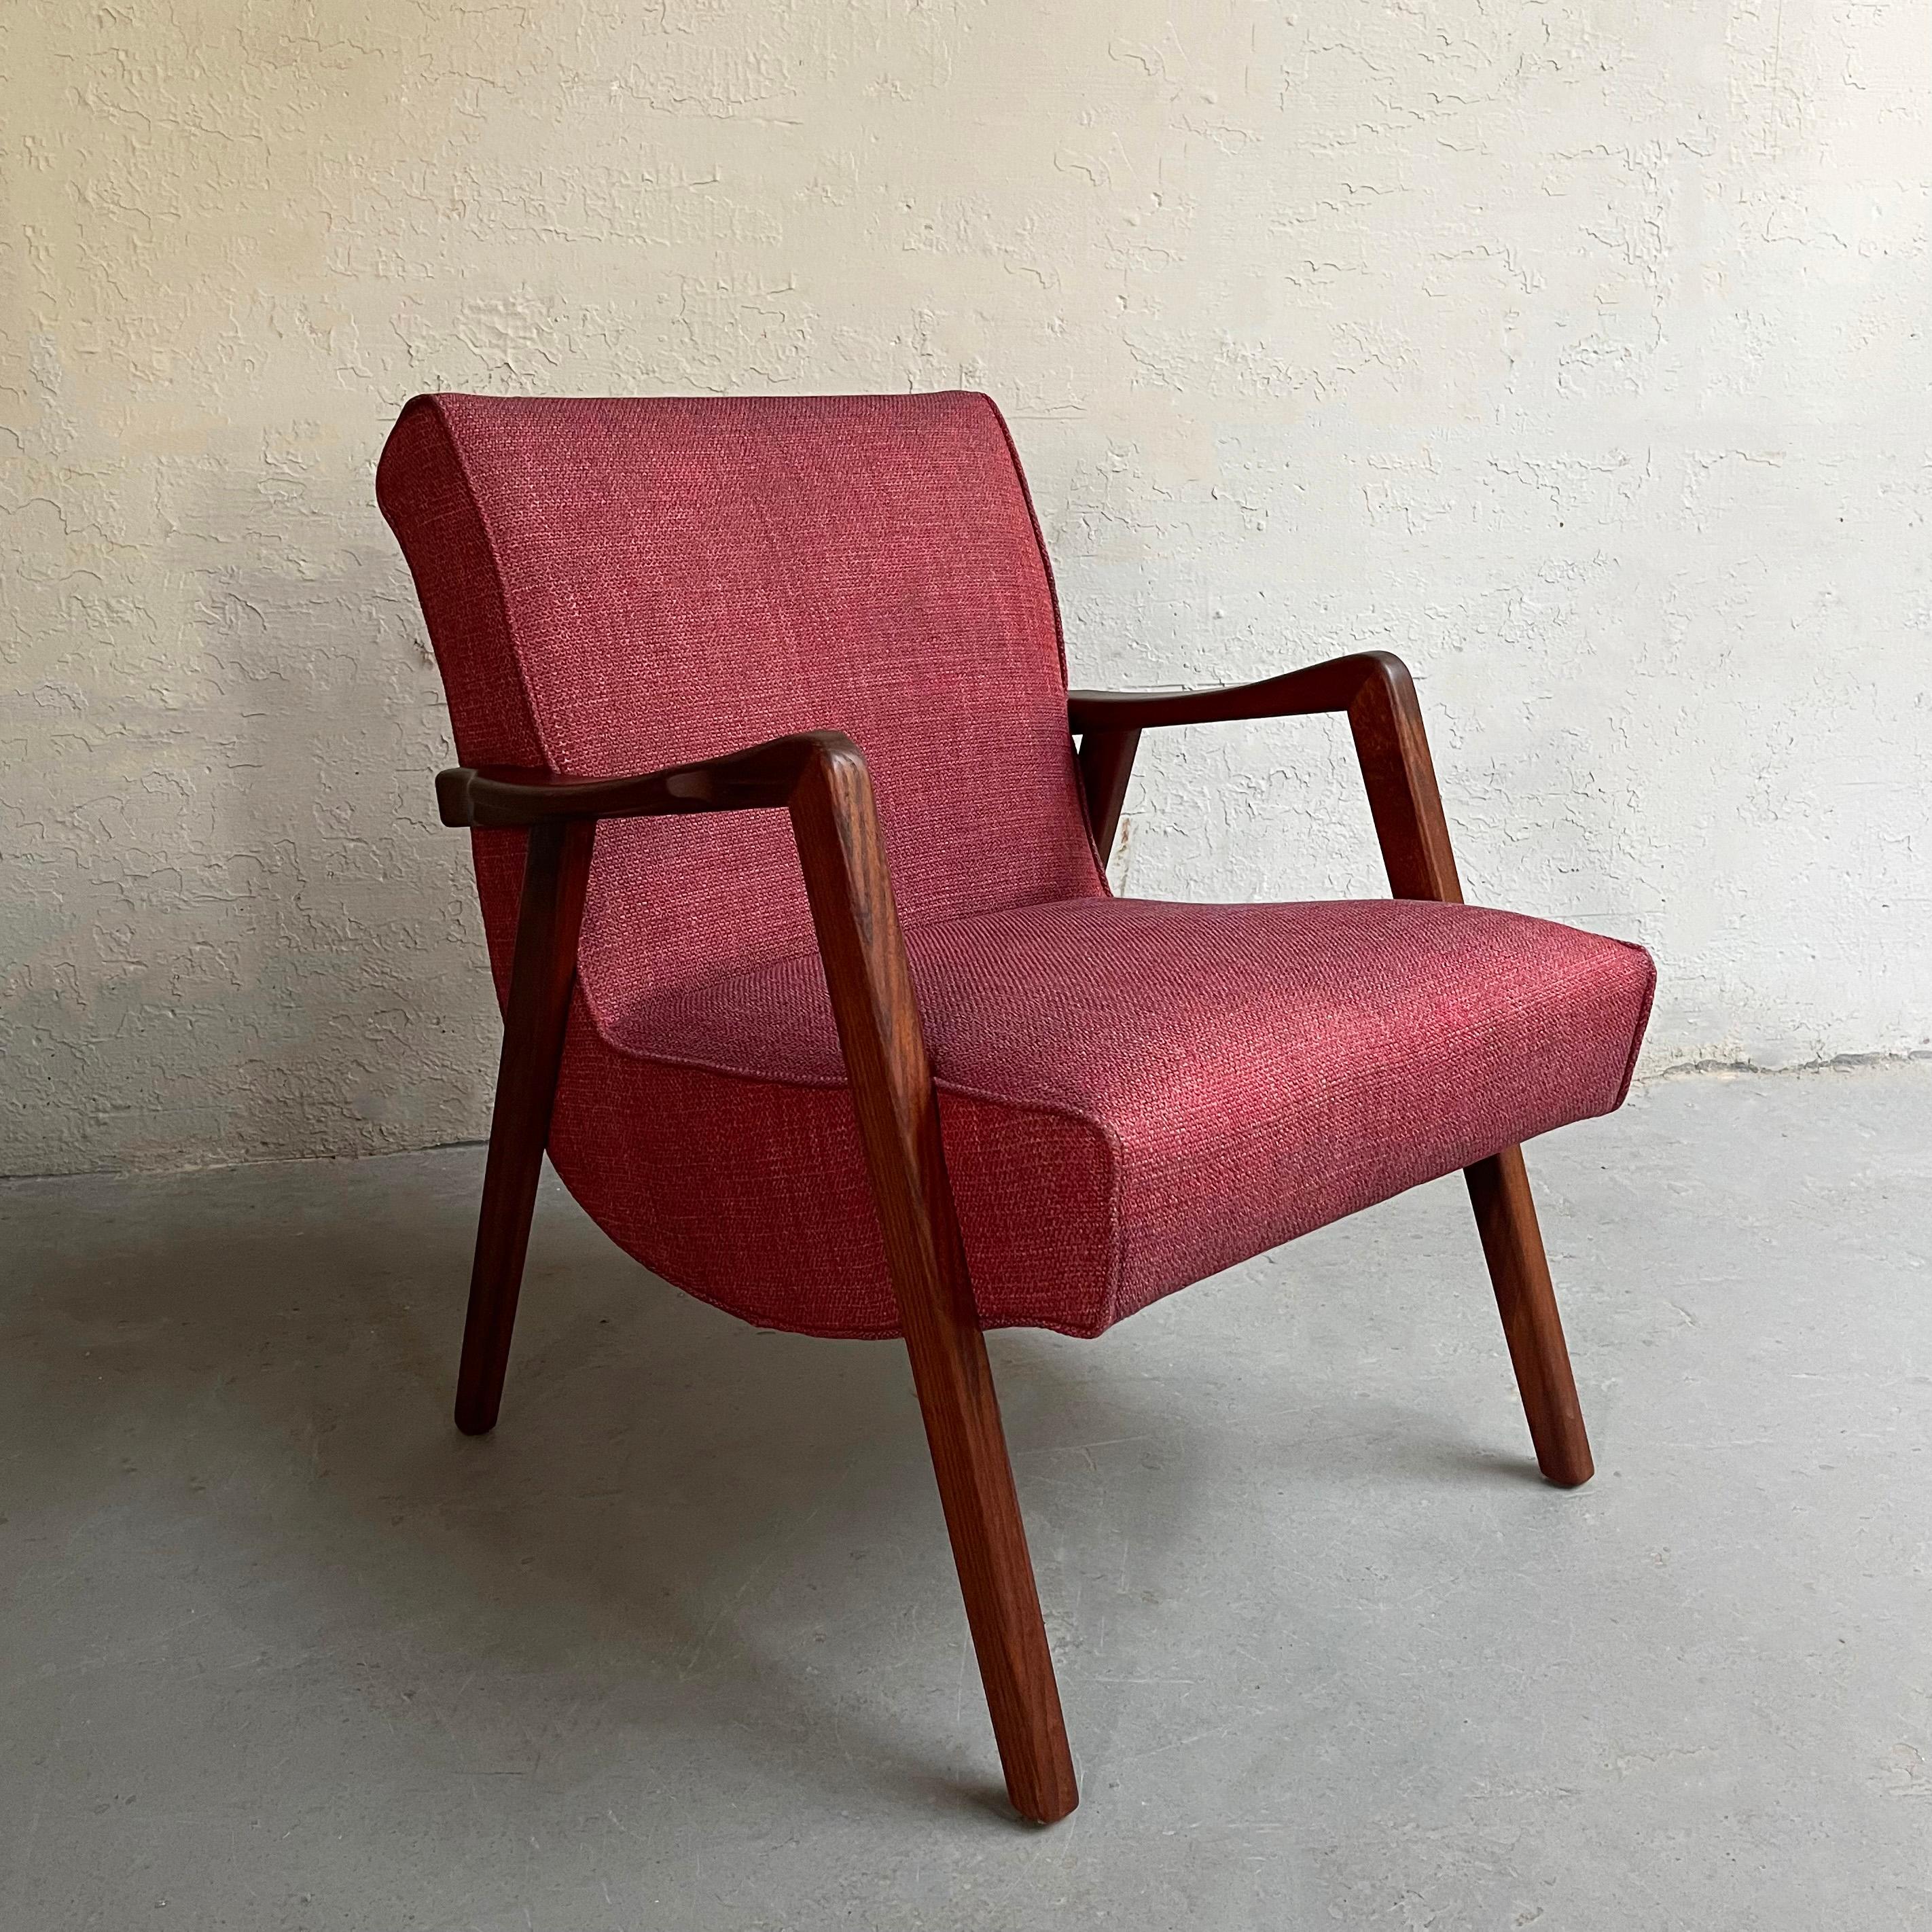 Scandinavian modern armchair features a sculptural walnut frame with scoop seat newly upholstered in raspberry tweed.